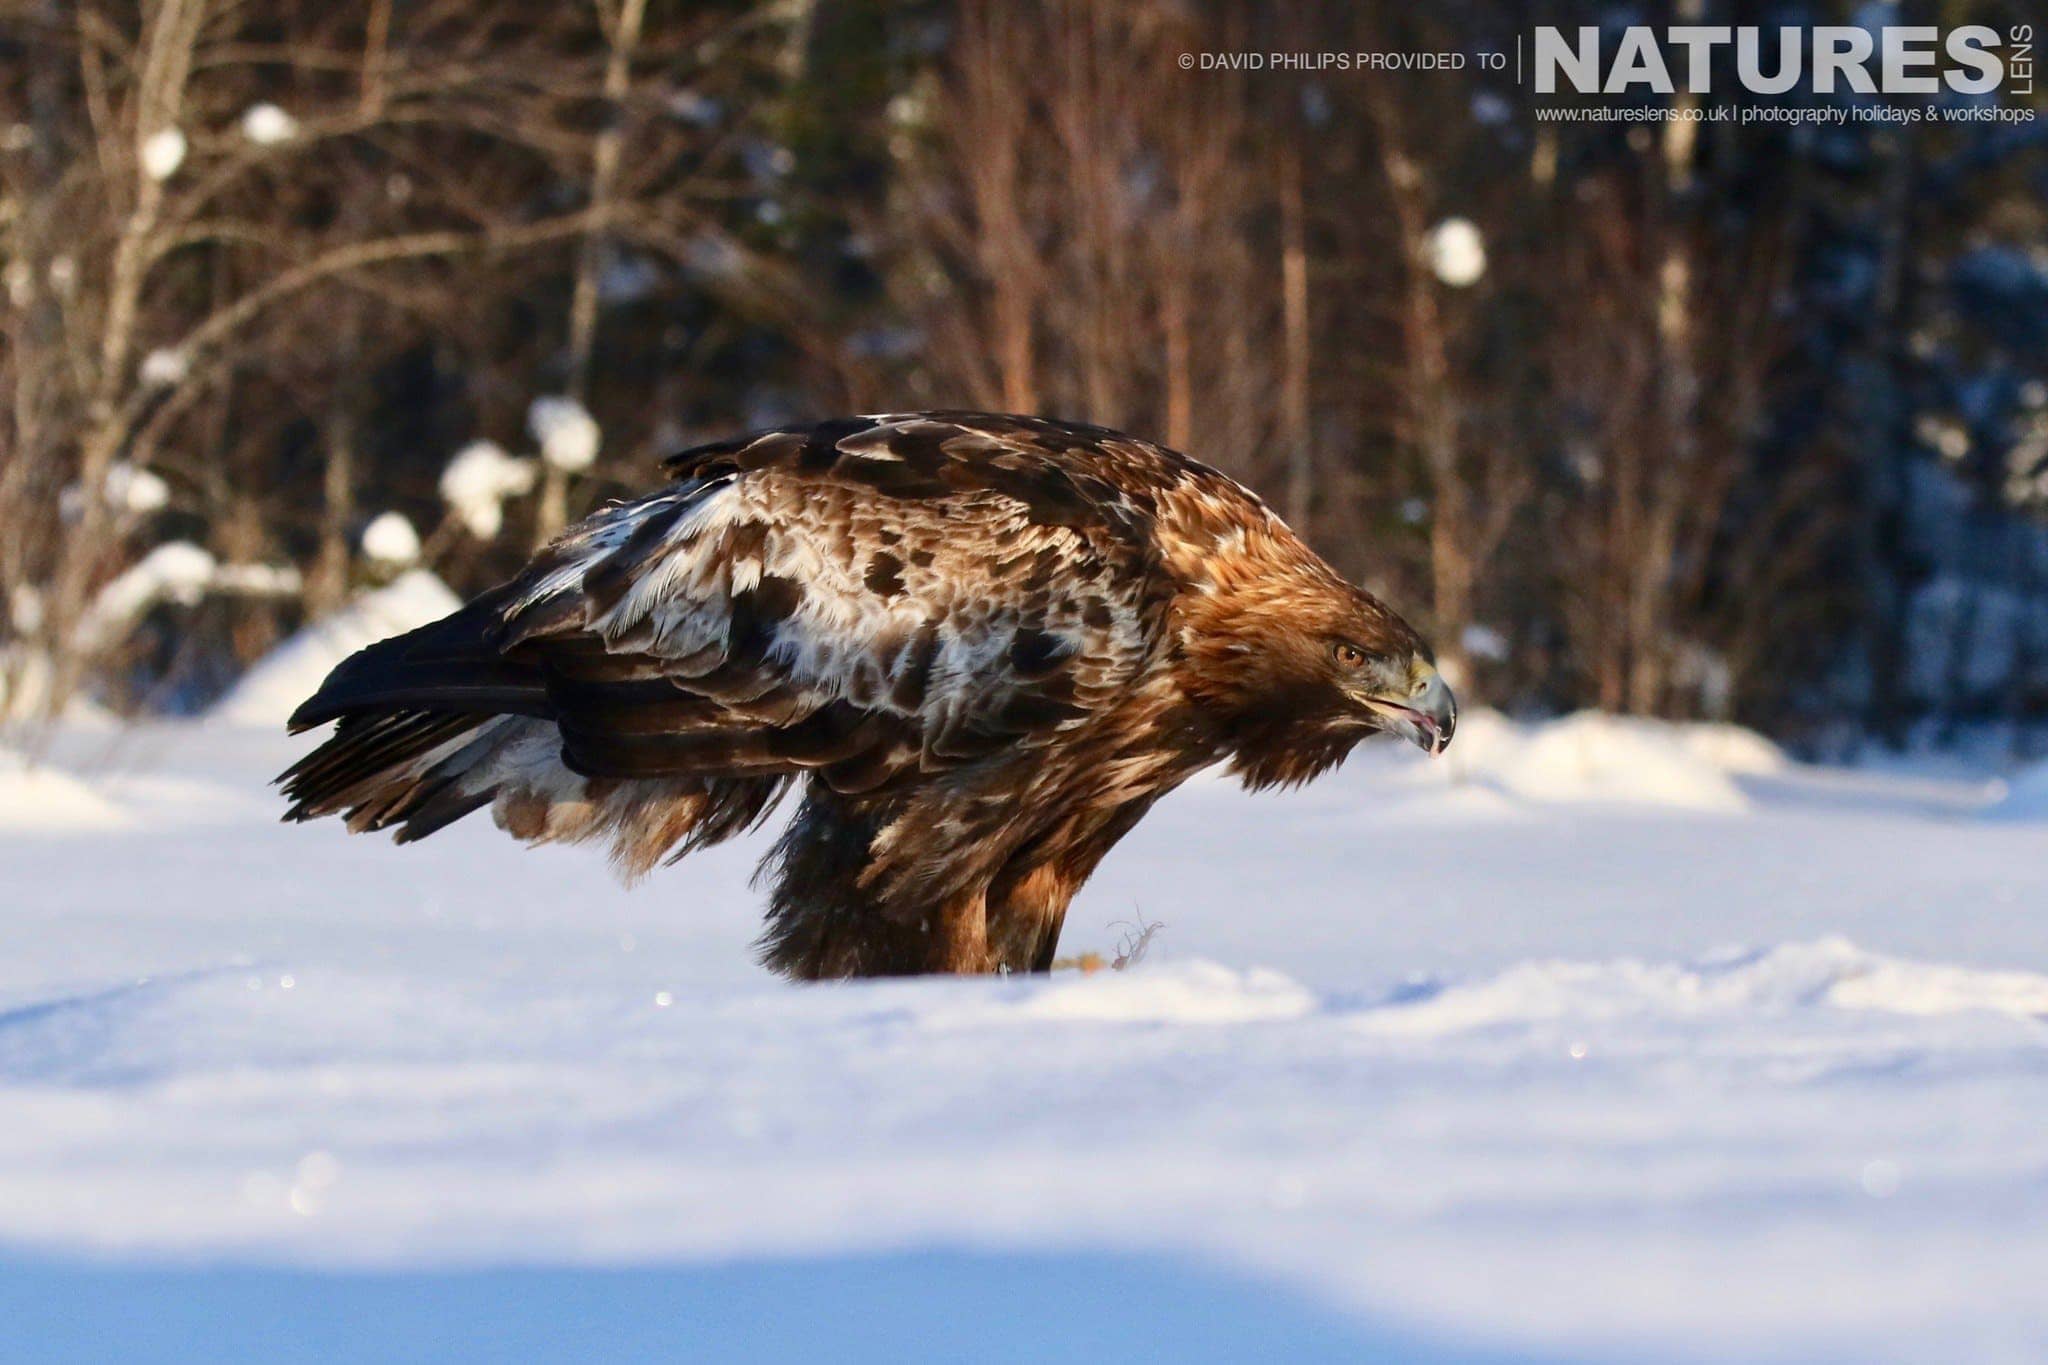 Illuminated By Beautiful Light One Of The Golden Eagles In The Snow Image Captured During The Natureslens Golden Eagles Of The Swedish Winter Photography Holiday